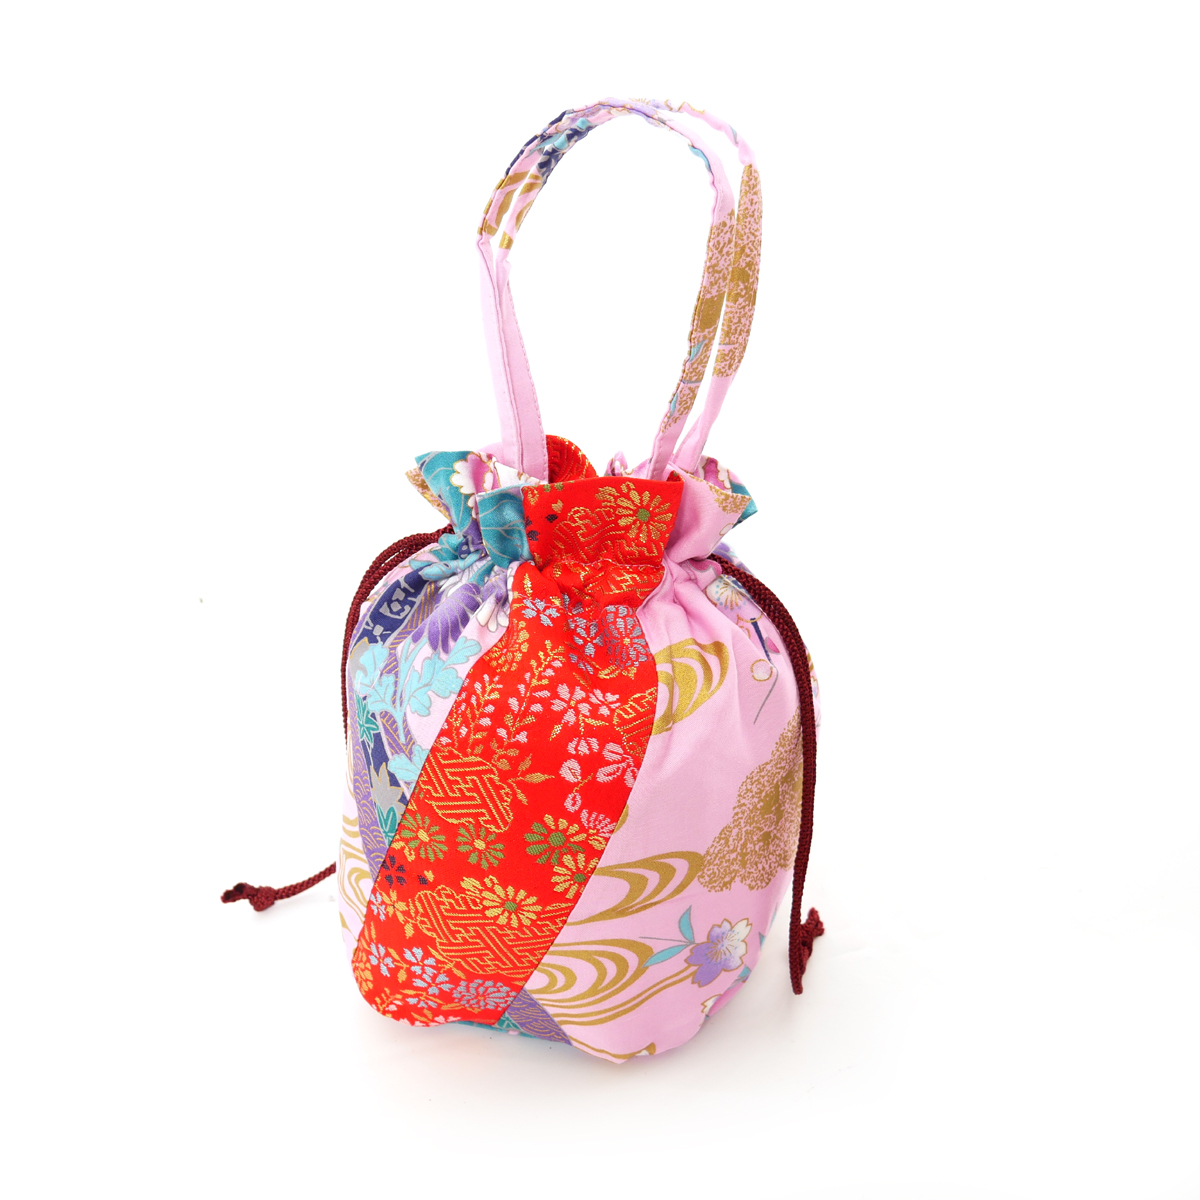 Japanese traditional red kimono bag in polyester cotton, POUCH, various  random patterns